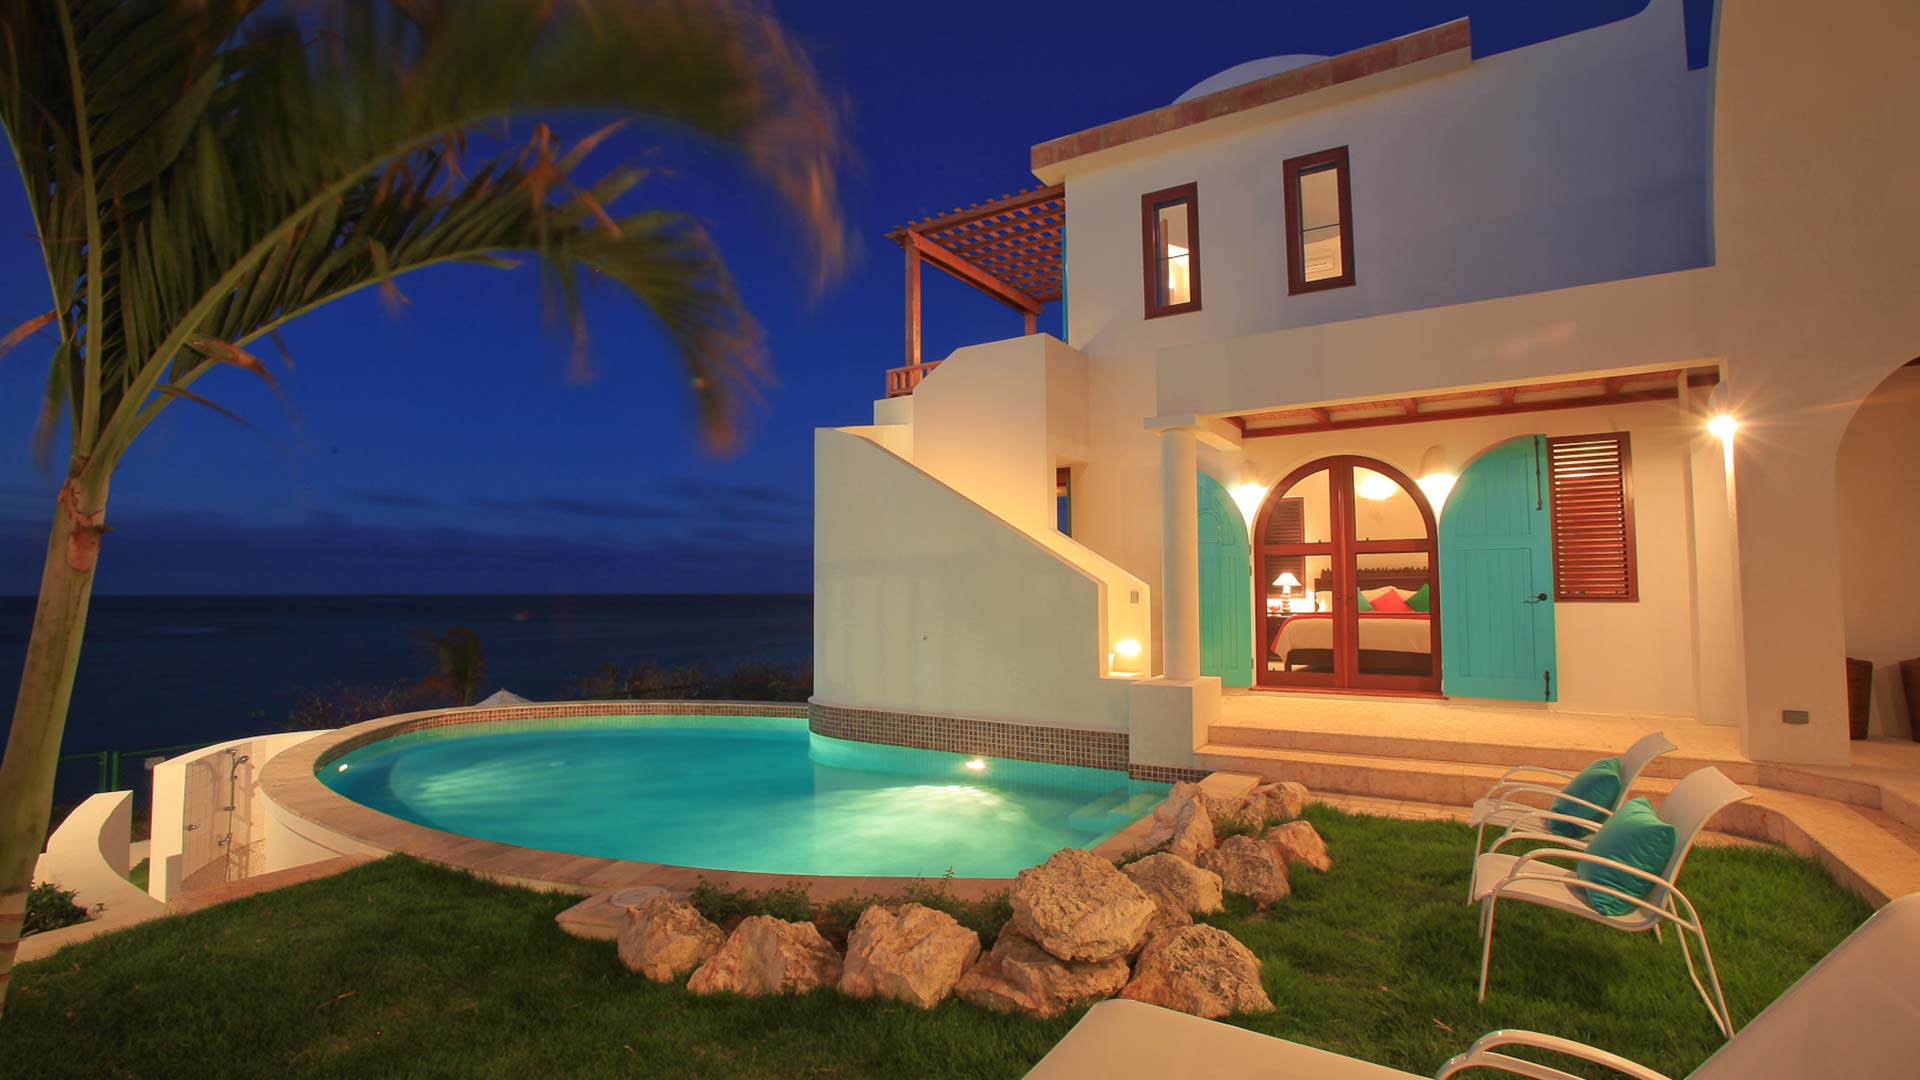 Black Pearl Villa is designed to make the most of the dramatic Shoal Bay location.